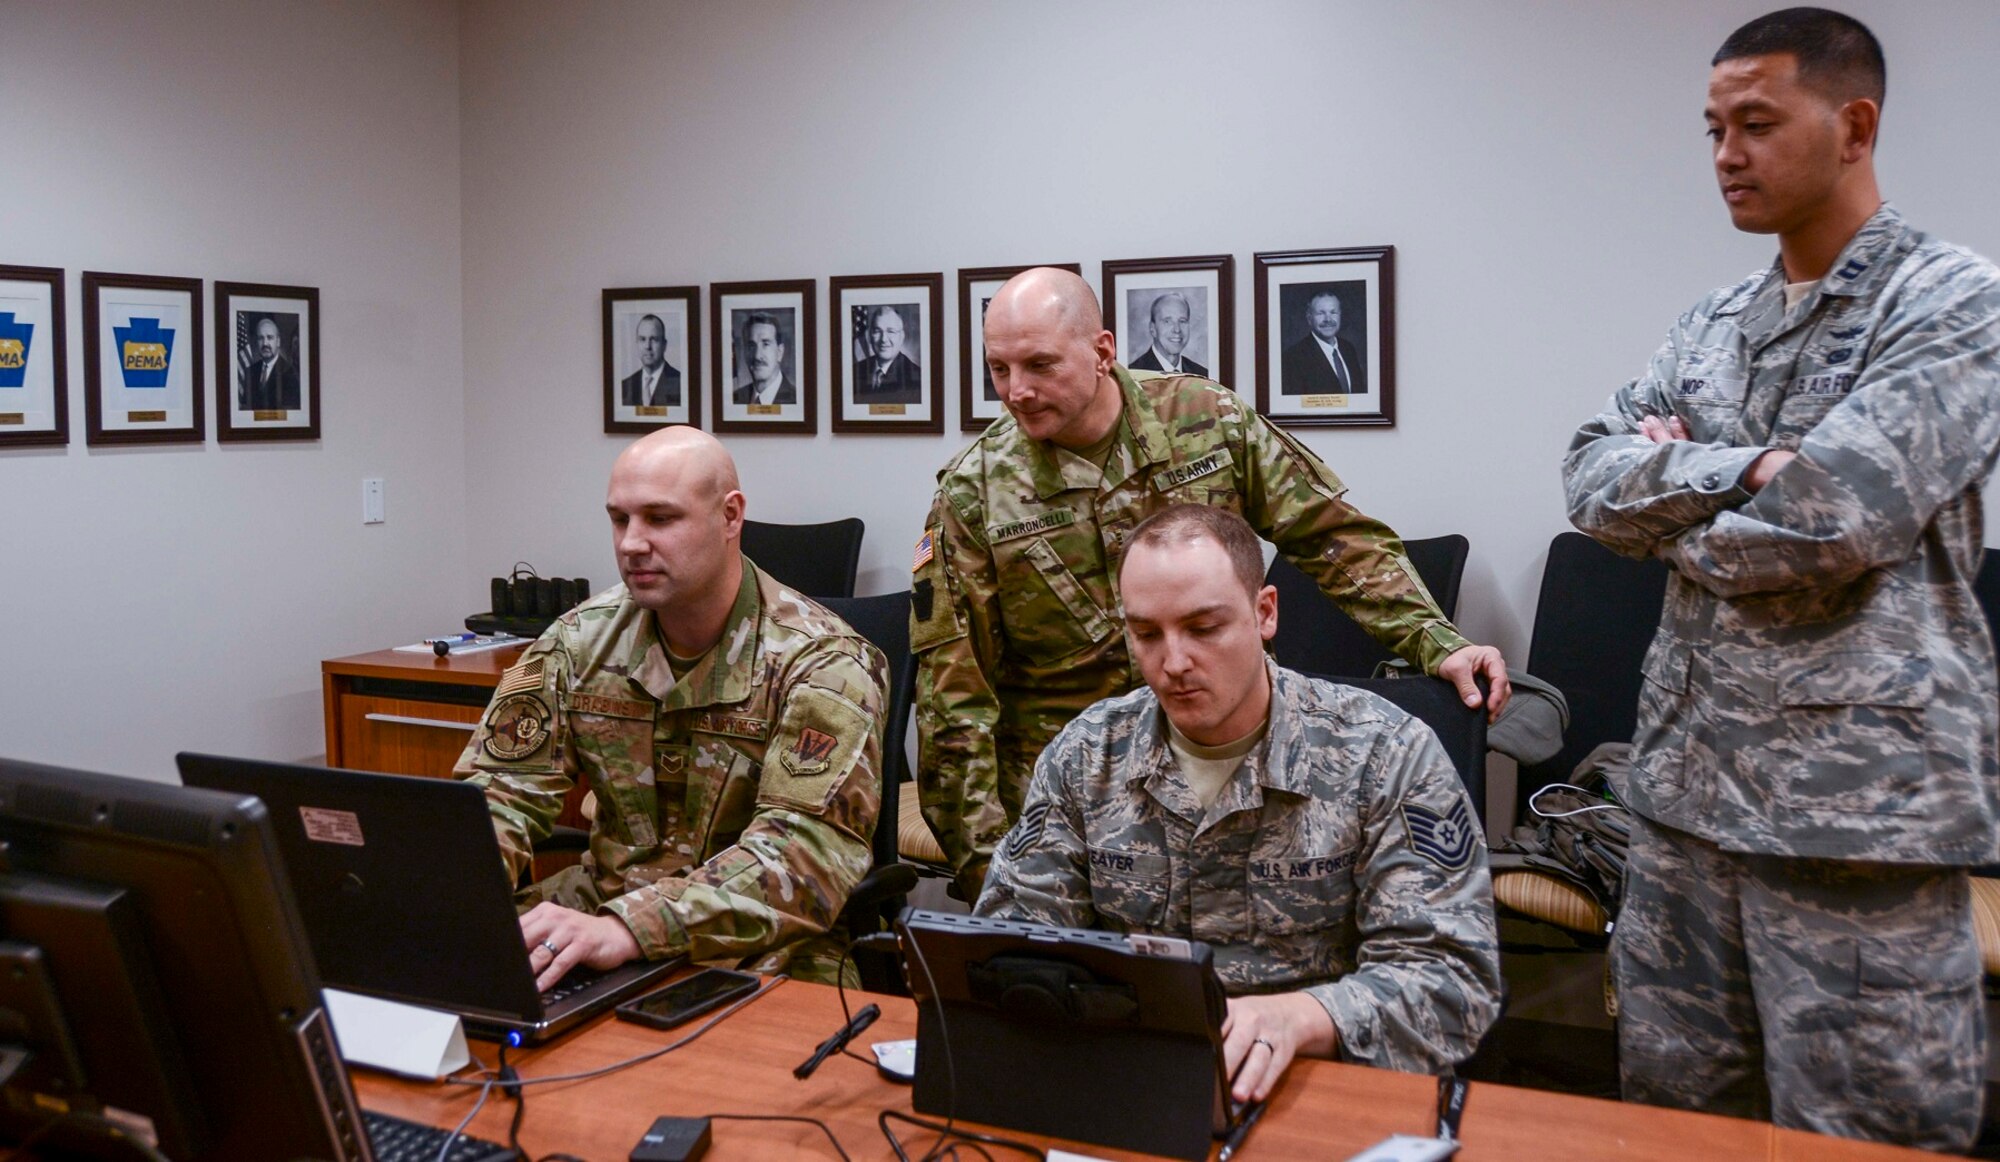 Approximately 30 members of the Pennsylvania National Guard joined other state agencies at three locations Nov. 5 to ensure the security of the commonwealth’s general election. A team at the Pennsylvania Emergency Management Agency (above) focused on network monitoring, while teams at Fort Indiantown Gap and Horsham Air Guard Station focused on social media reporting. (U.S. Army National Guard photo by Staff Sgt. Zane Craig)